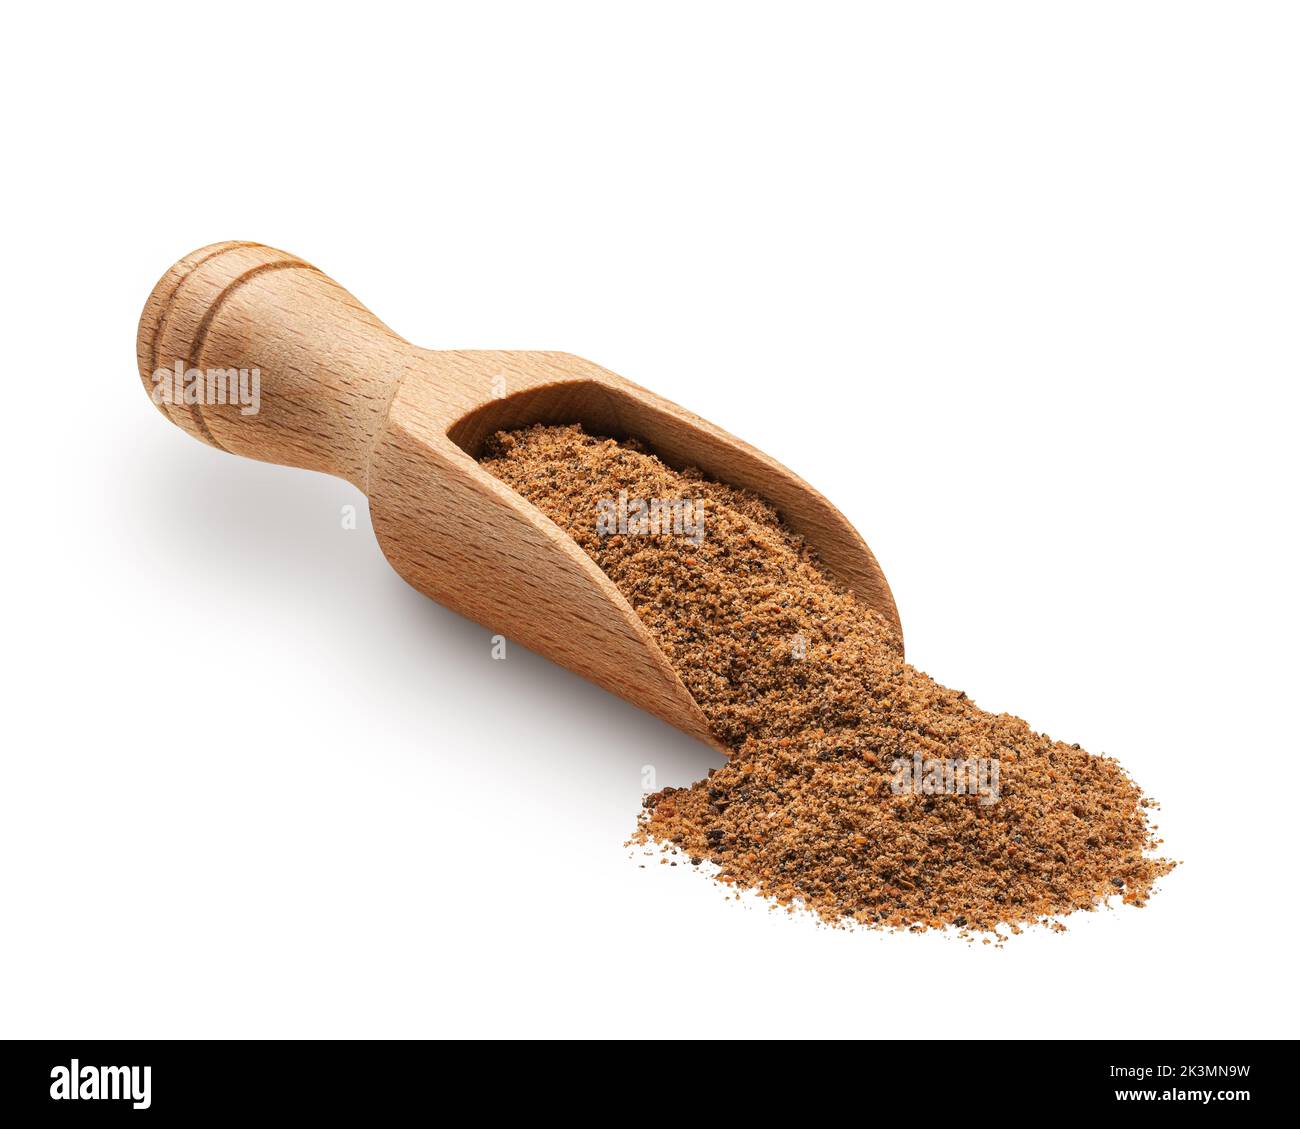 Nutmeg powder in a wooden scoop isolated on white background. Deep focus Stock Photo